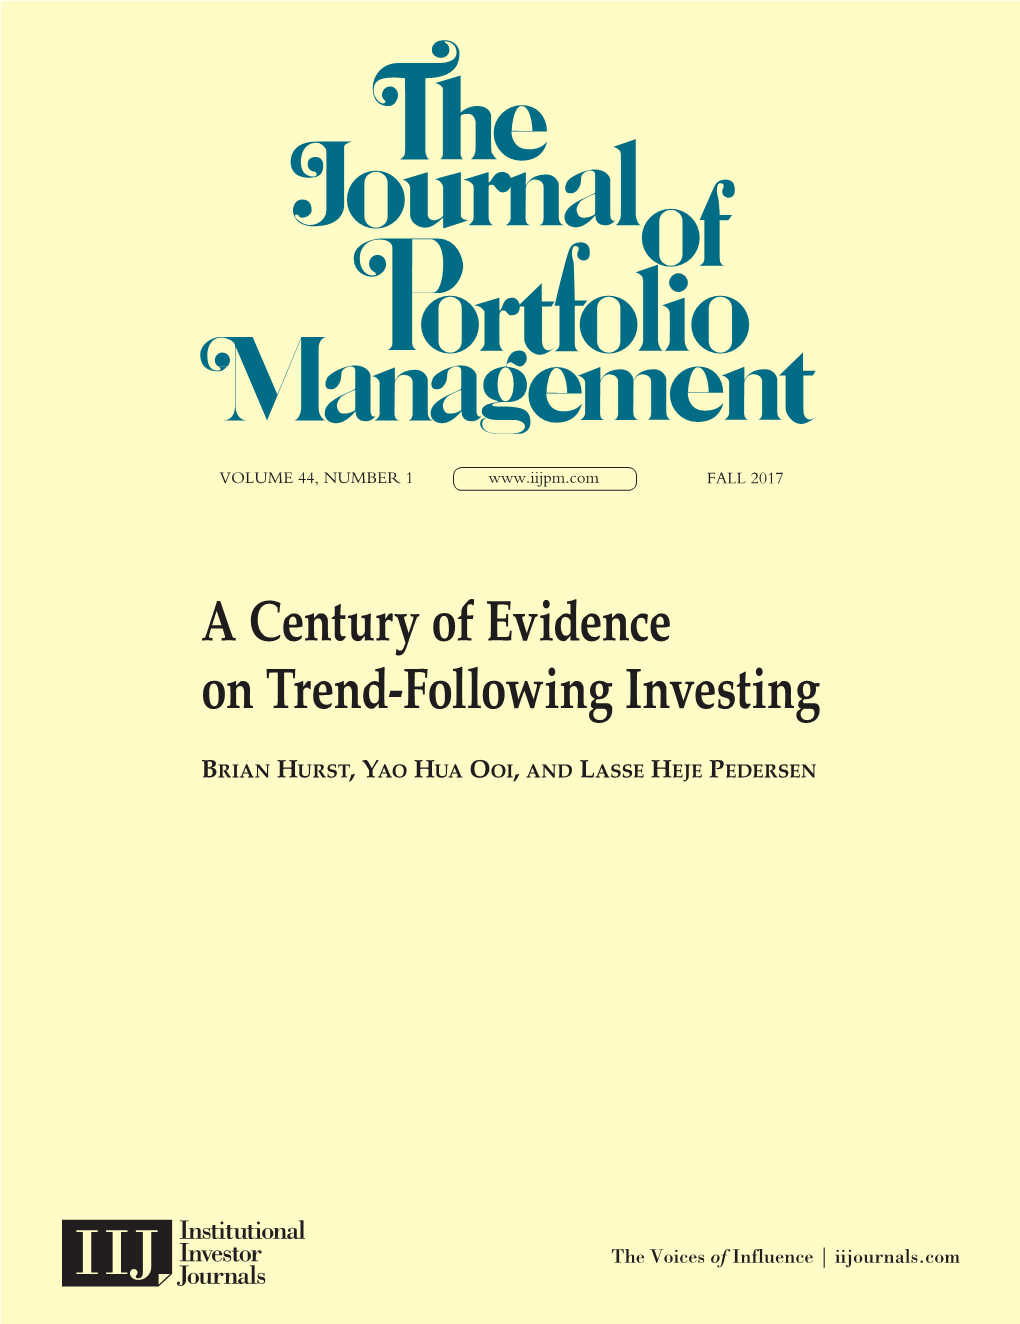 A Century of Evidence on Trend-Following Investing